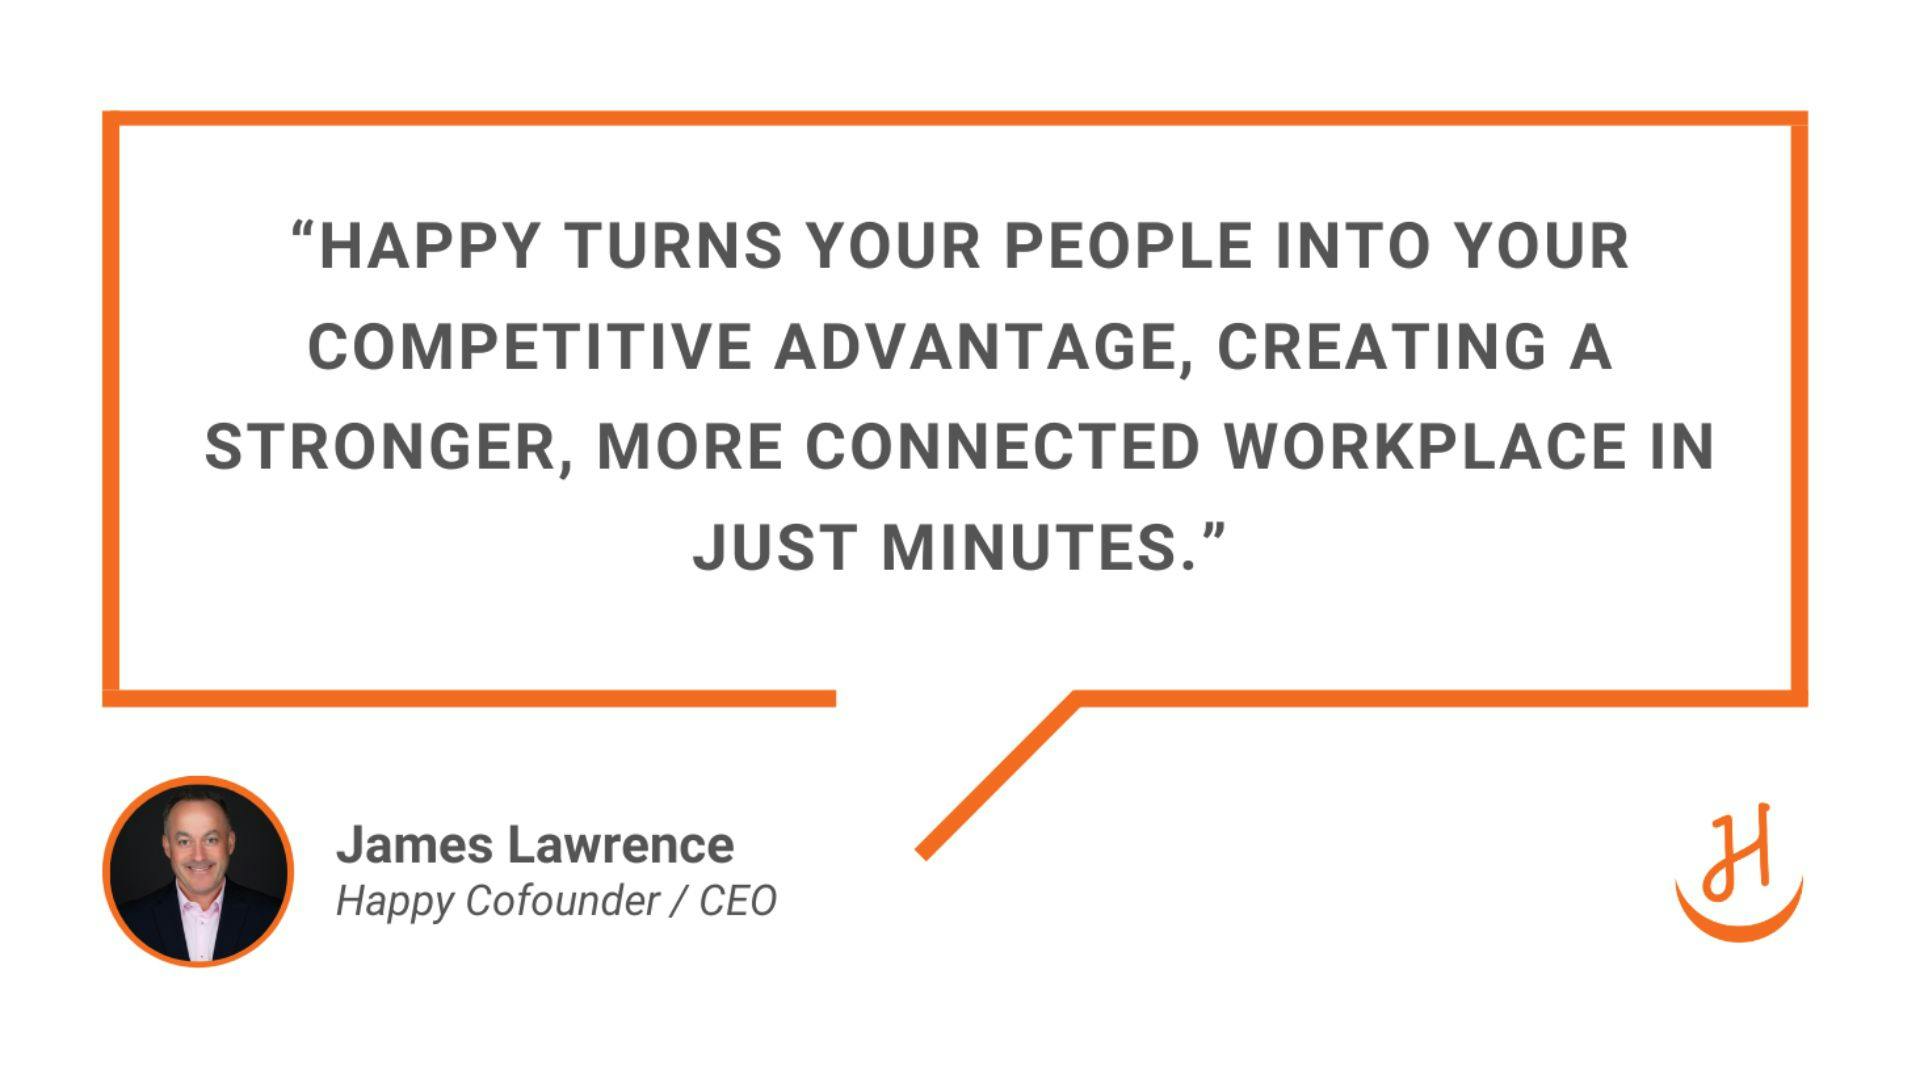 “Happy turns your people into your competitive advantage, creating a stronger, more connected workplace in just minutes.” Quote by James Lawrence, Happy Cofounder and CEO